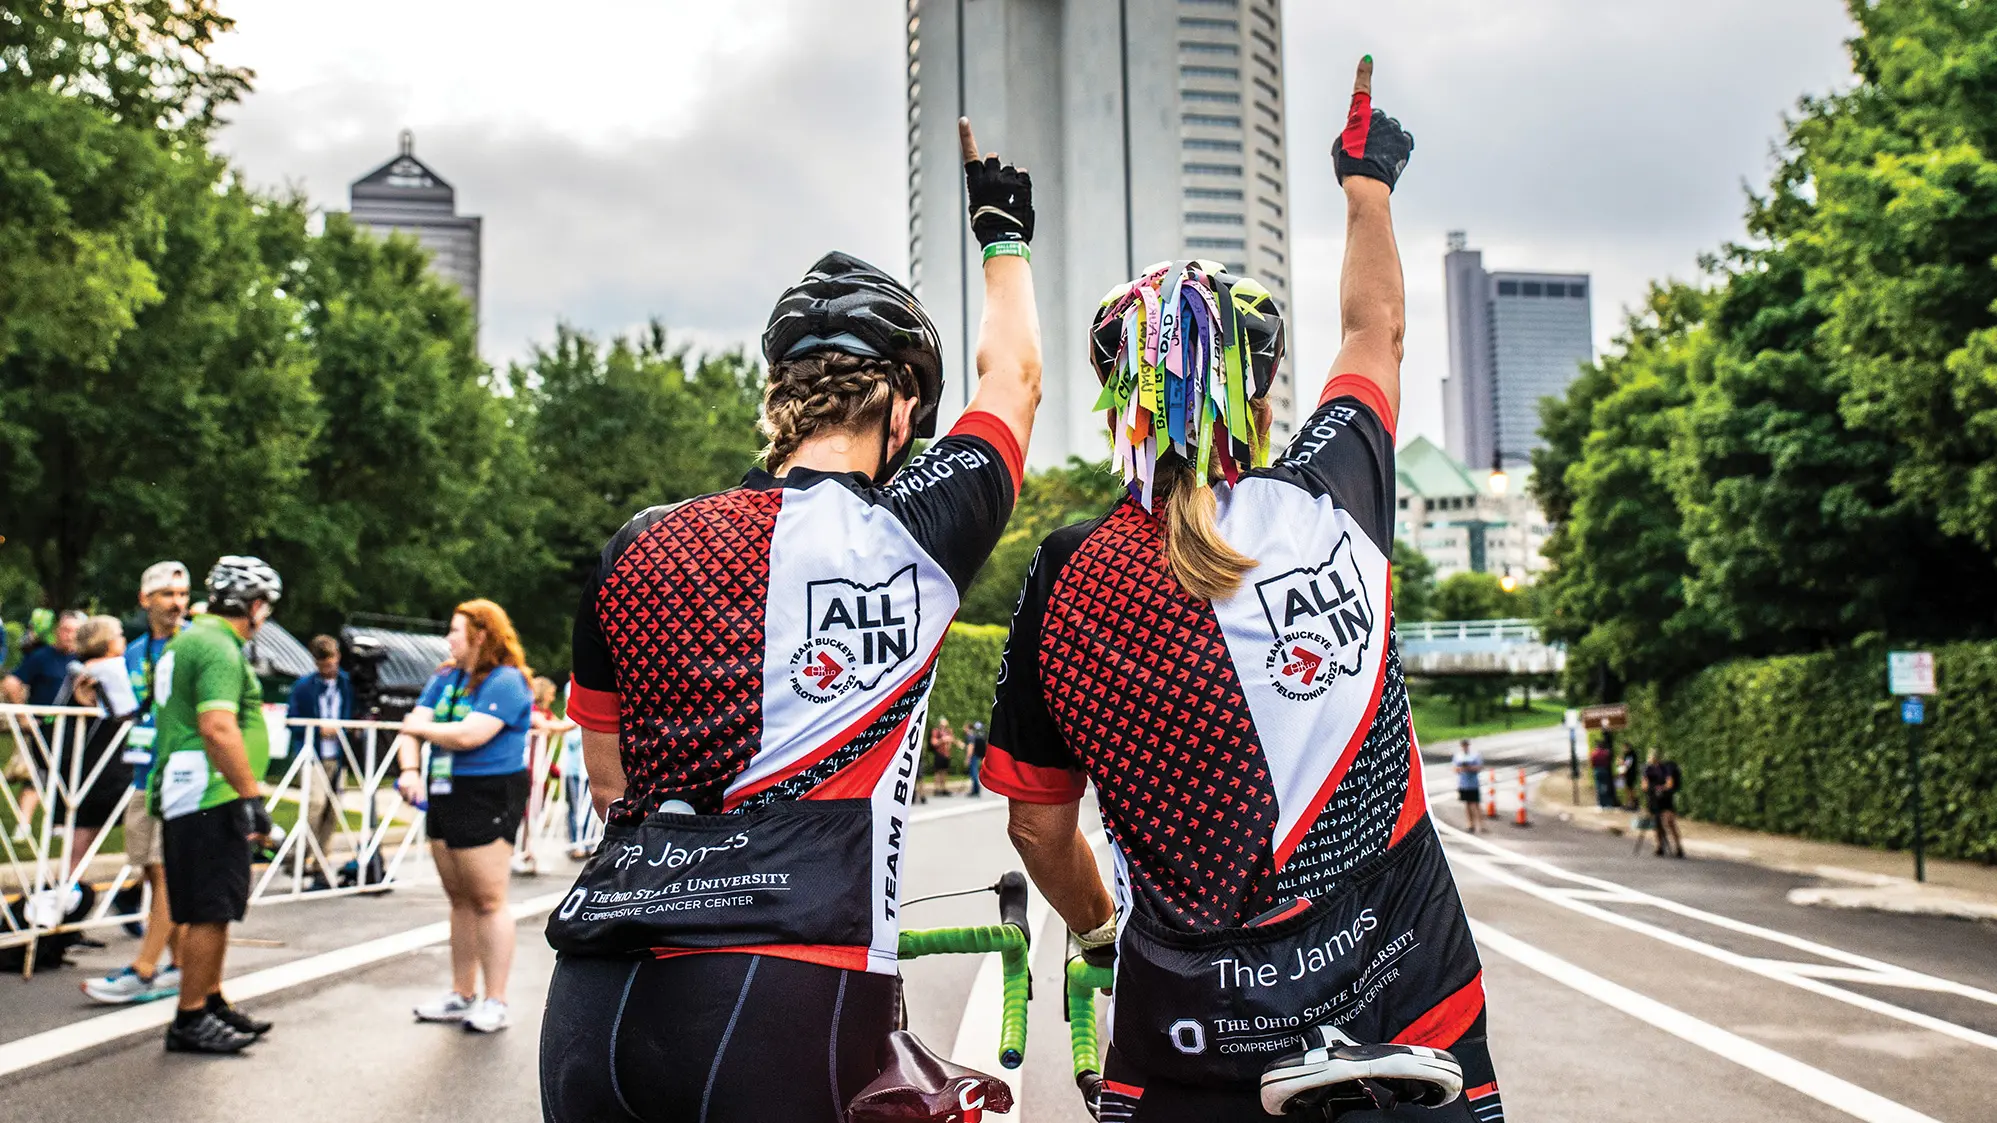 Two women raising their right hands high point to the sky, or make a number-one symbol. They’re seen from behind. The one on the left has intricately braided hair and a helmet, and the one on the right has a bike helmet trailing more than a dozen multicolored ribbons with writing on each. Far in front of them, downtown skyscrapers can be seen.